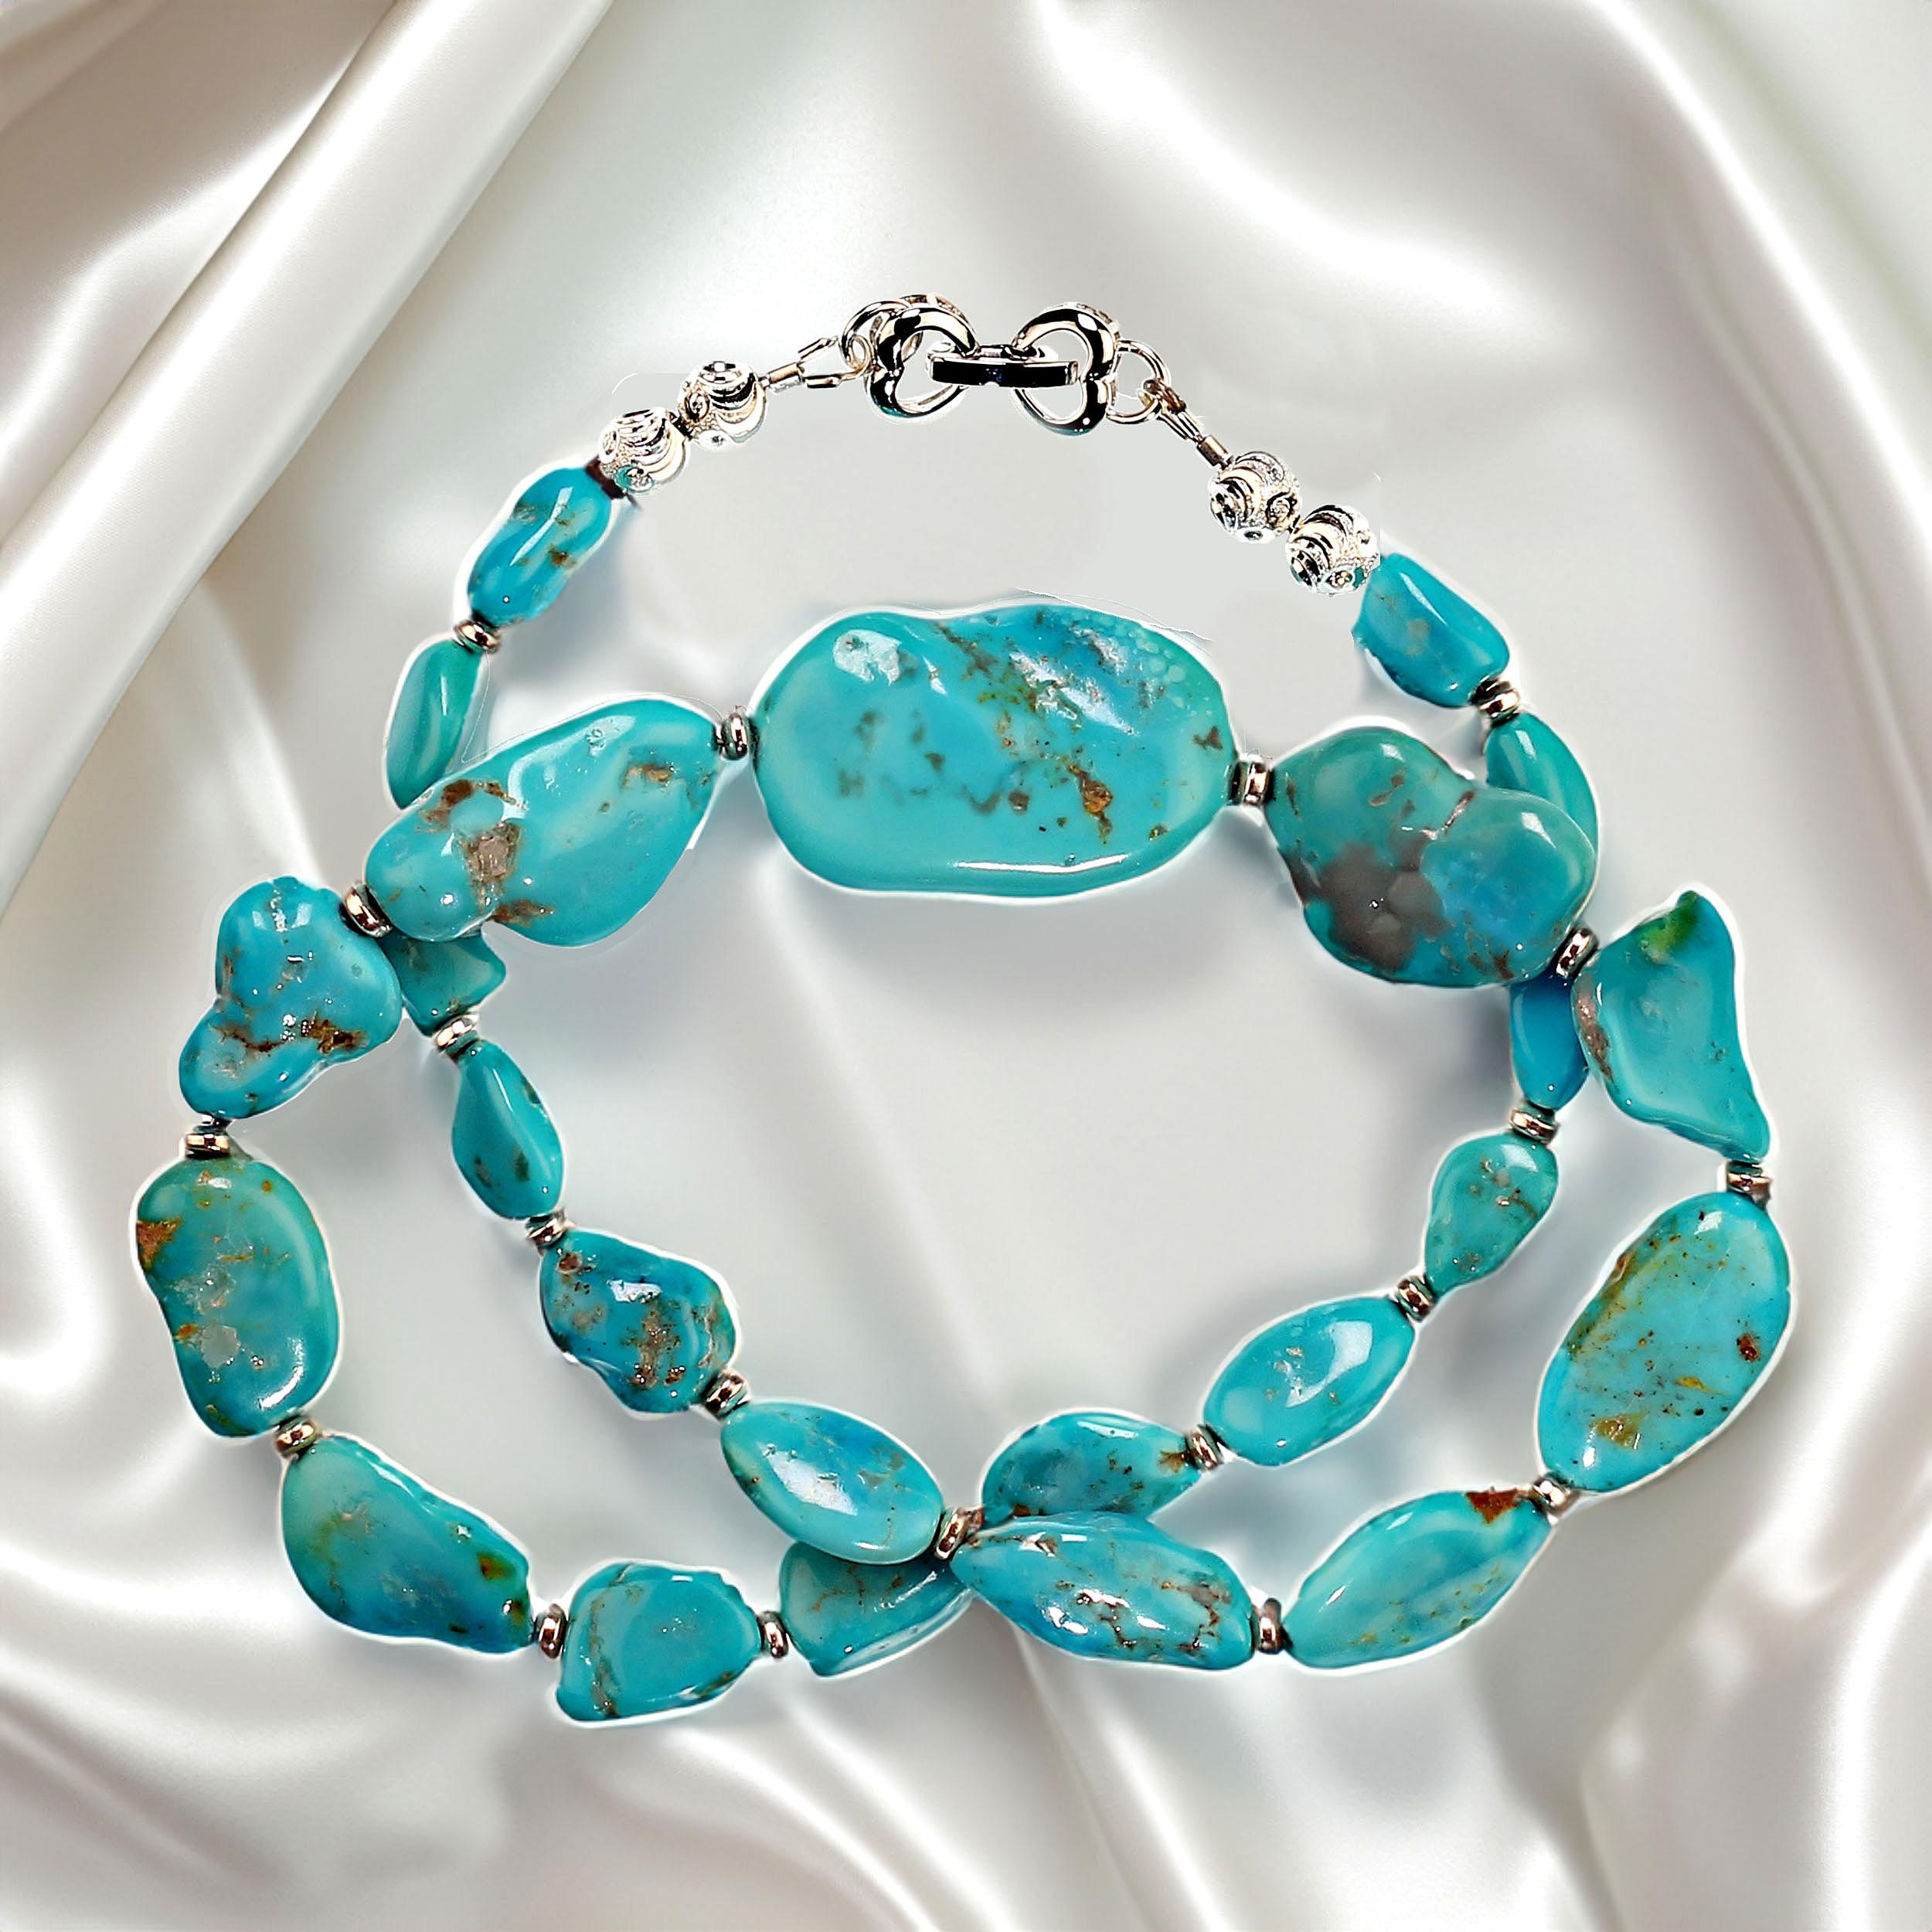 Elegant necklace of Sleeping Beauty Turquoise flat nuggets with silvery accents and a charming double heart clasp. The nuggets graduate from 11 to 32MM.  This 19-inch necklace is the perfect Sleeping Beauty color from the world-famous Sleeping